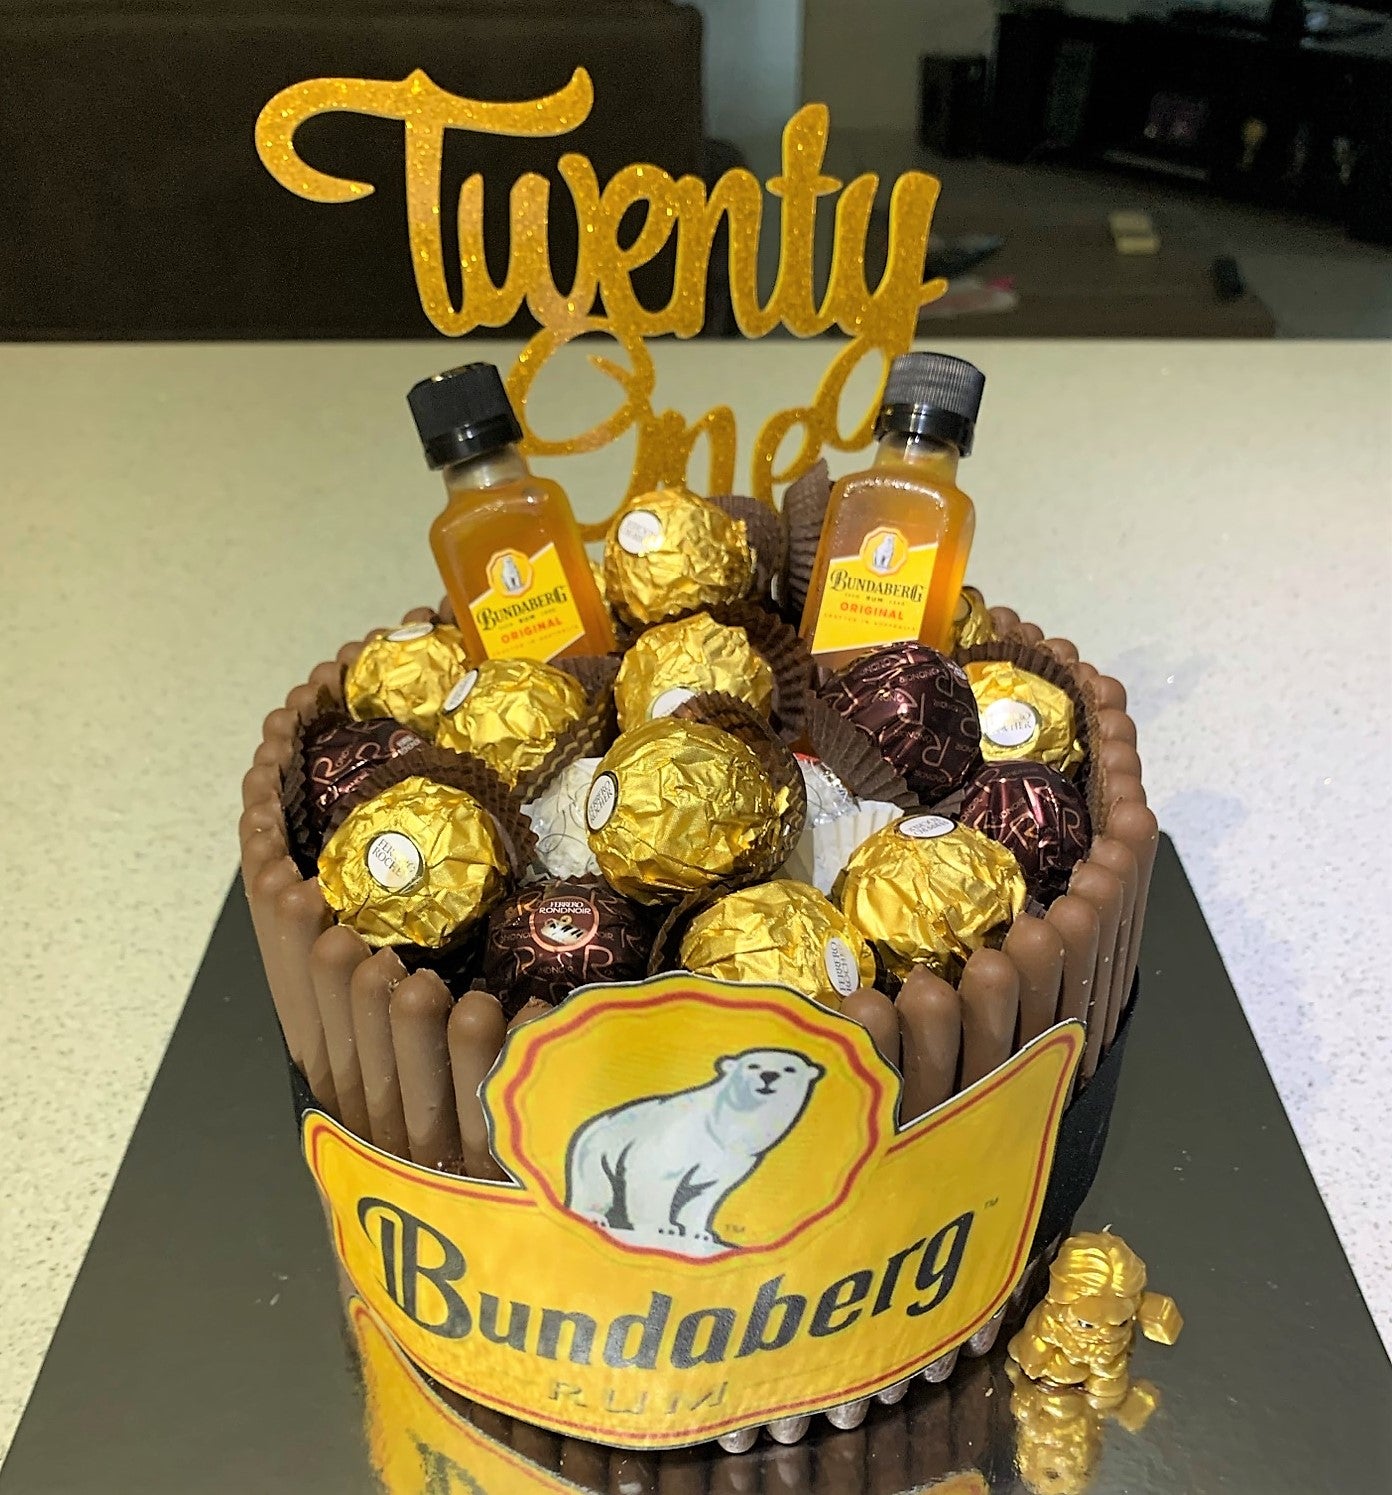 Bundaberg Rum edible image, turn your cake into a masterpiece with edible images